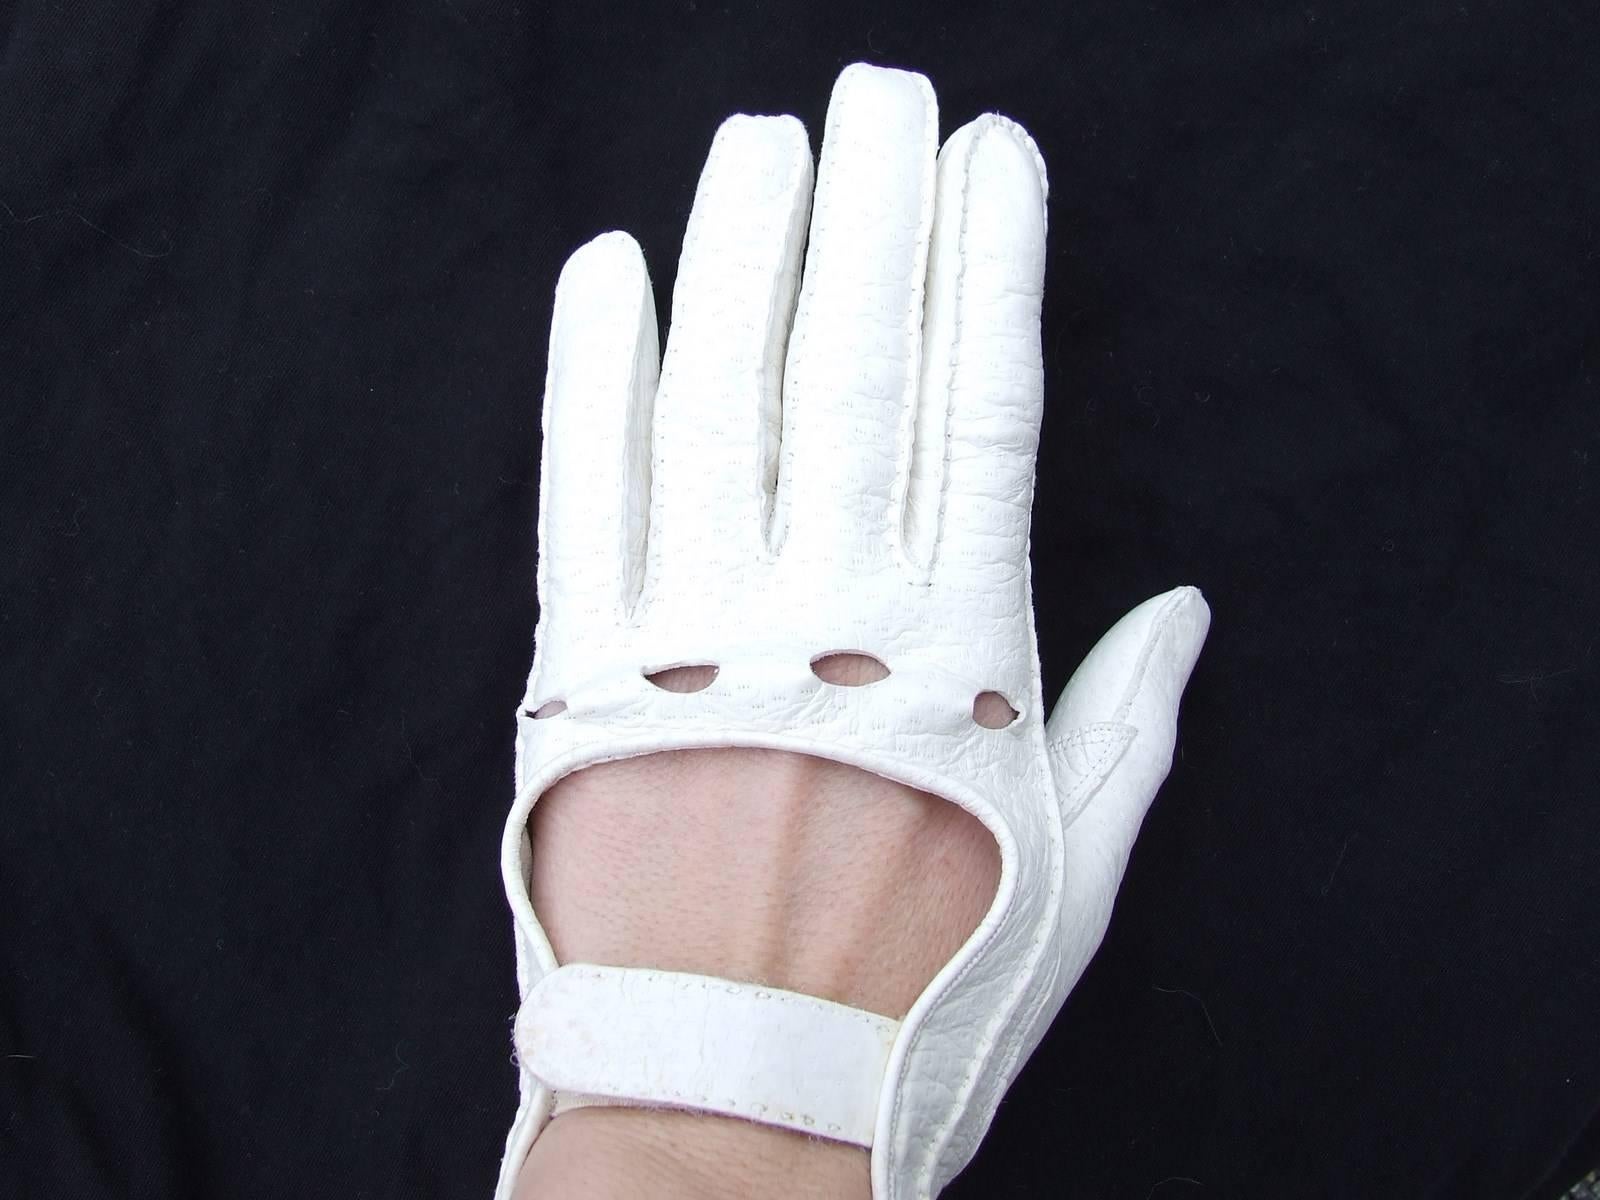 RARE AND BEAUTIFUL AUTHENTIC HERMES :

 

DRIVING GLOVES

 

Made in France

 

Made of Lambskin Leather

 

Colorway: off white

 
4 holes on top, and beautifully perforated on the palm
 
 
 
Very fine patterns on the entire